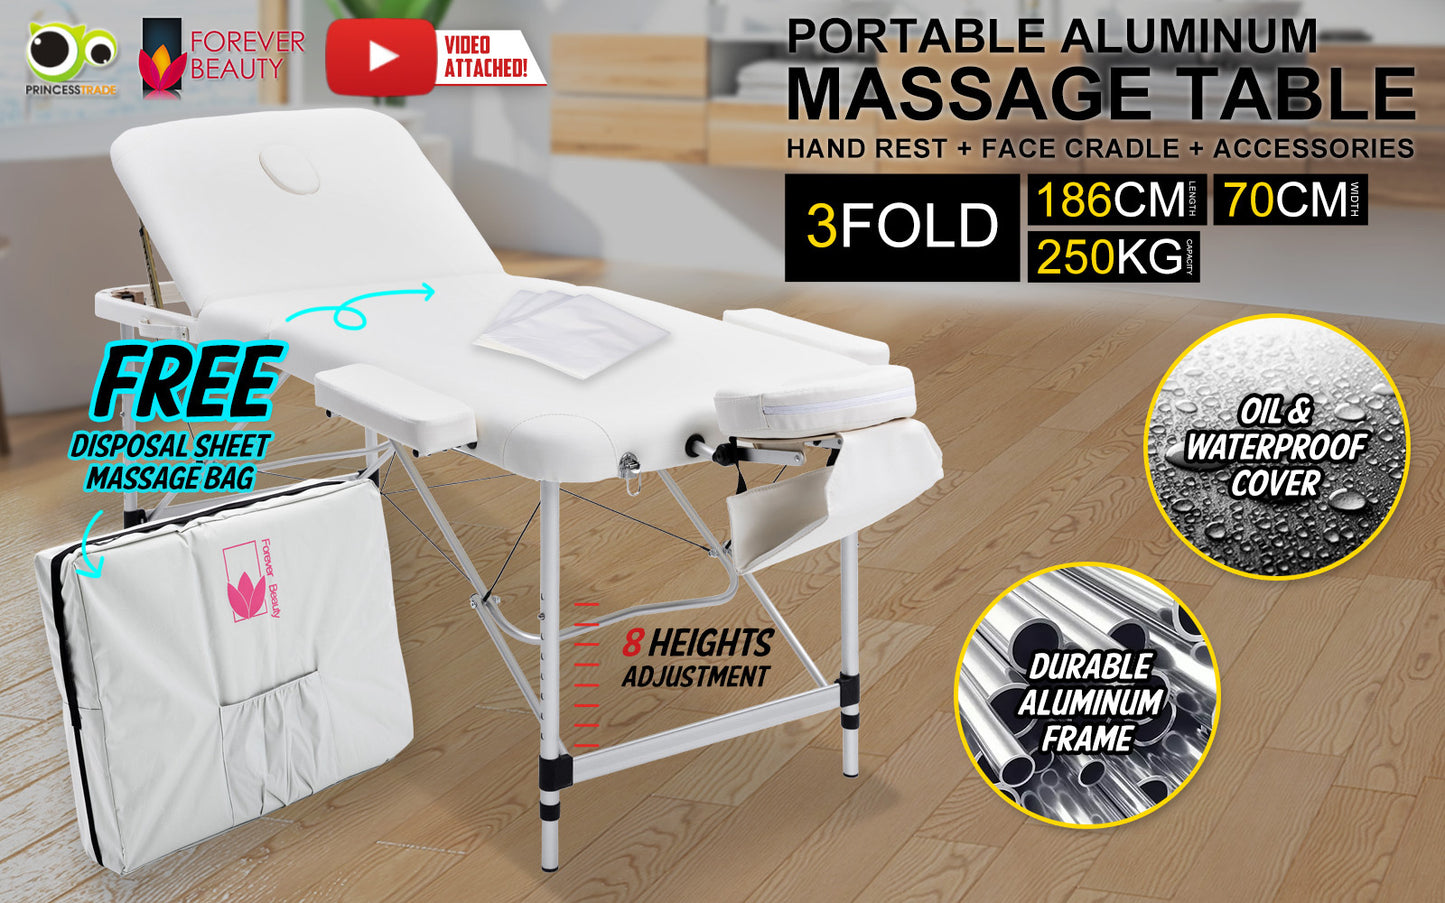 White Portable Beauty Massage Table Bed Therapy Waxing 3 Fold 70cm Aluminium - image2